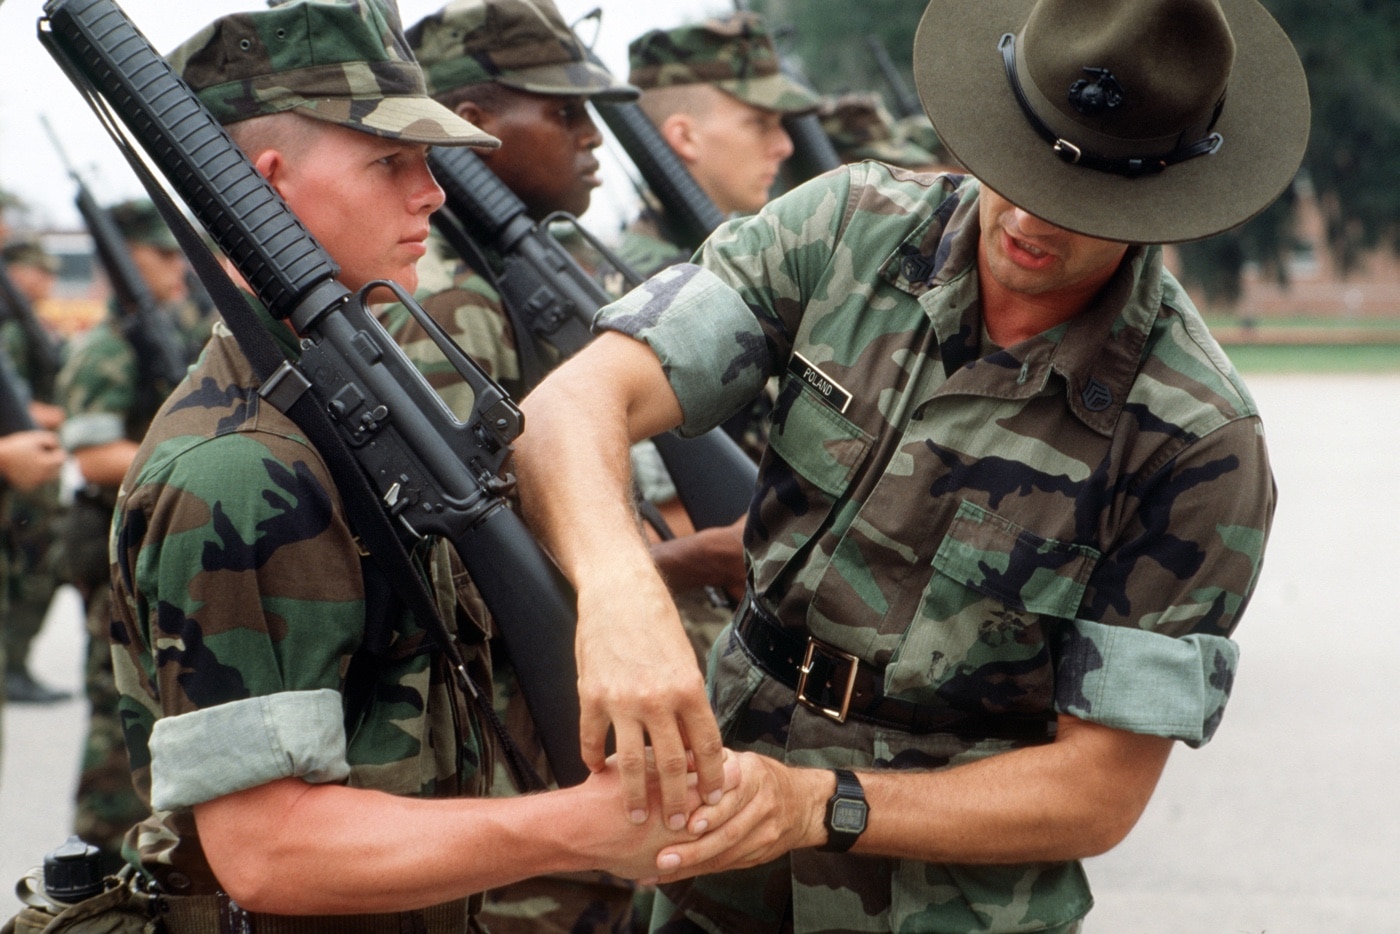 In this photograph, a USMC drill instructor teaches rifle drill to Marine recruits. The recruit Marines are carrying M16A2. The image is from the 	National Archives and Records Administration.